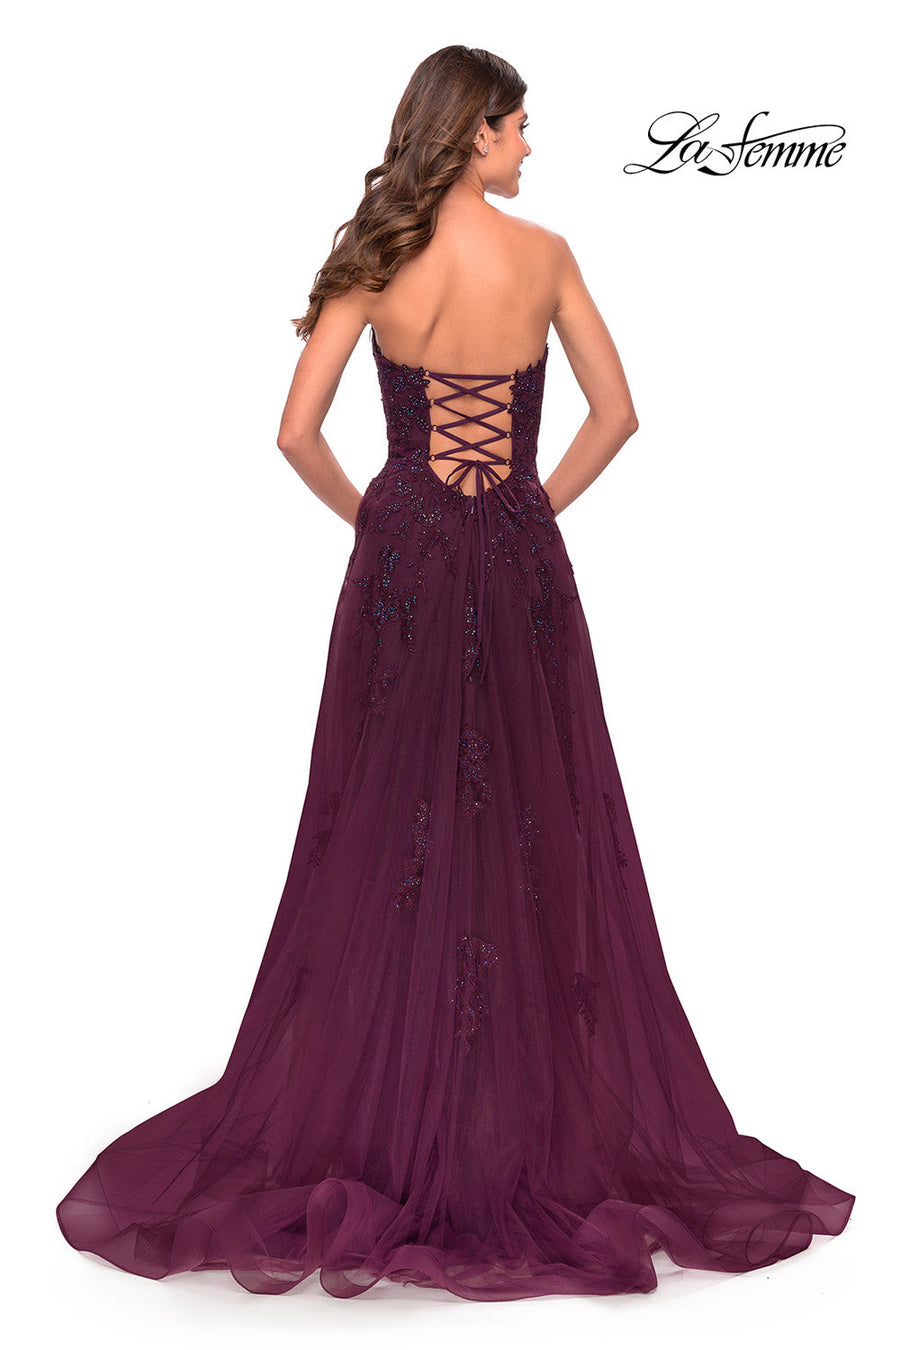 La Femme 31345 prom dress images.  La Femme 31345 is available in these colors: Dark Berry, Dark Emerald.